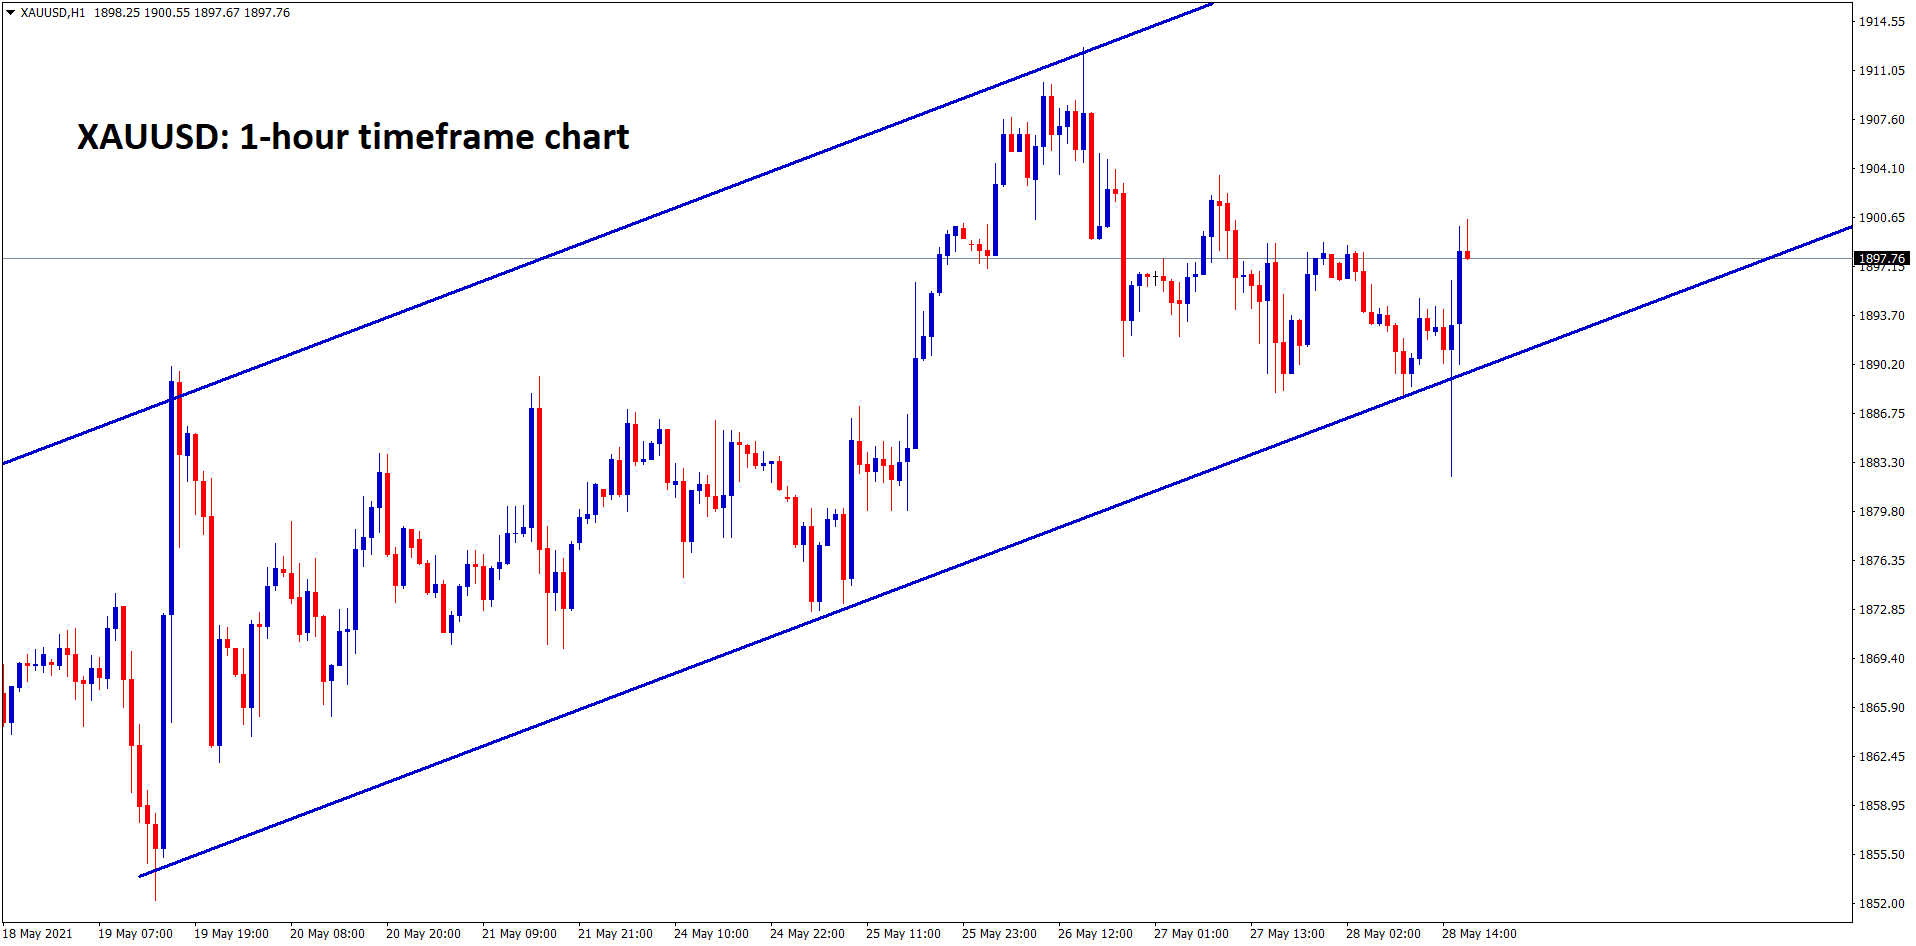 Gold XAUUSD is still moving in an Uptrend ascending channel